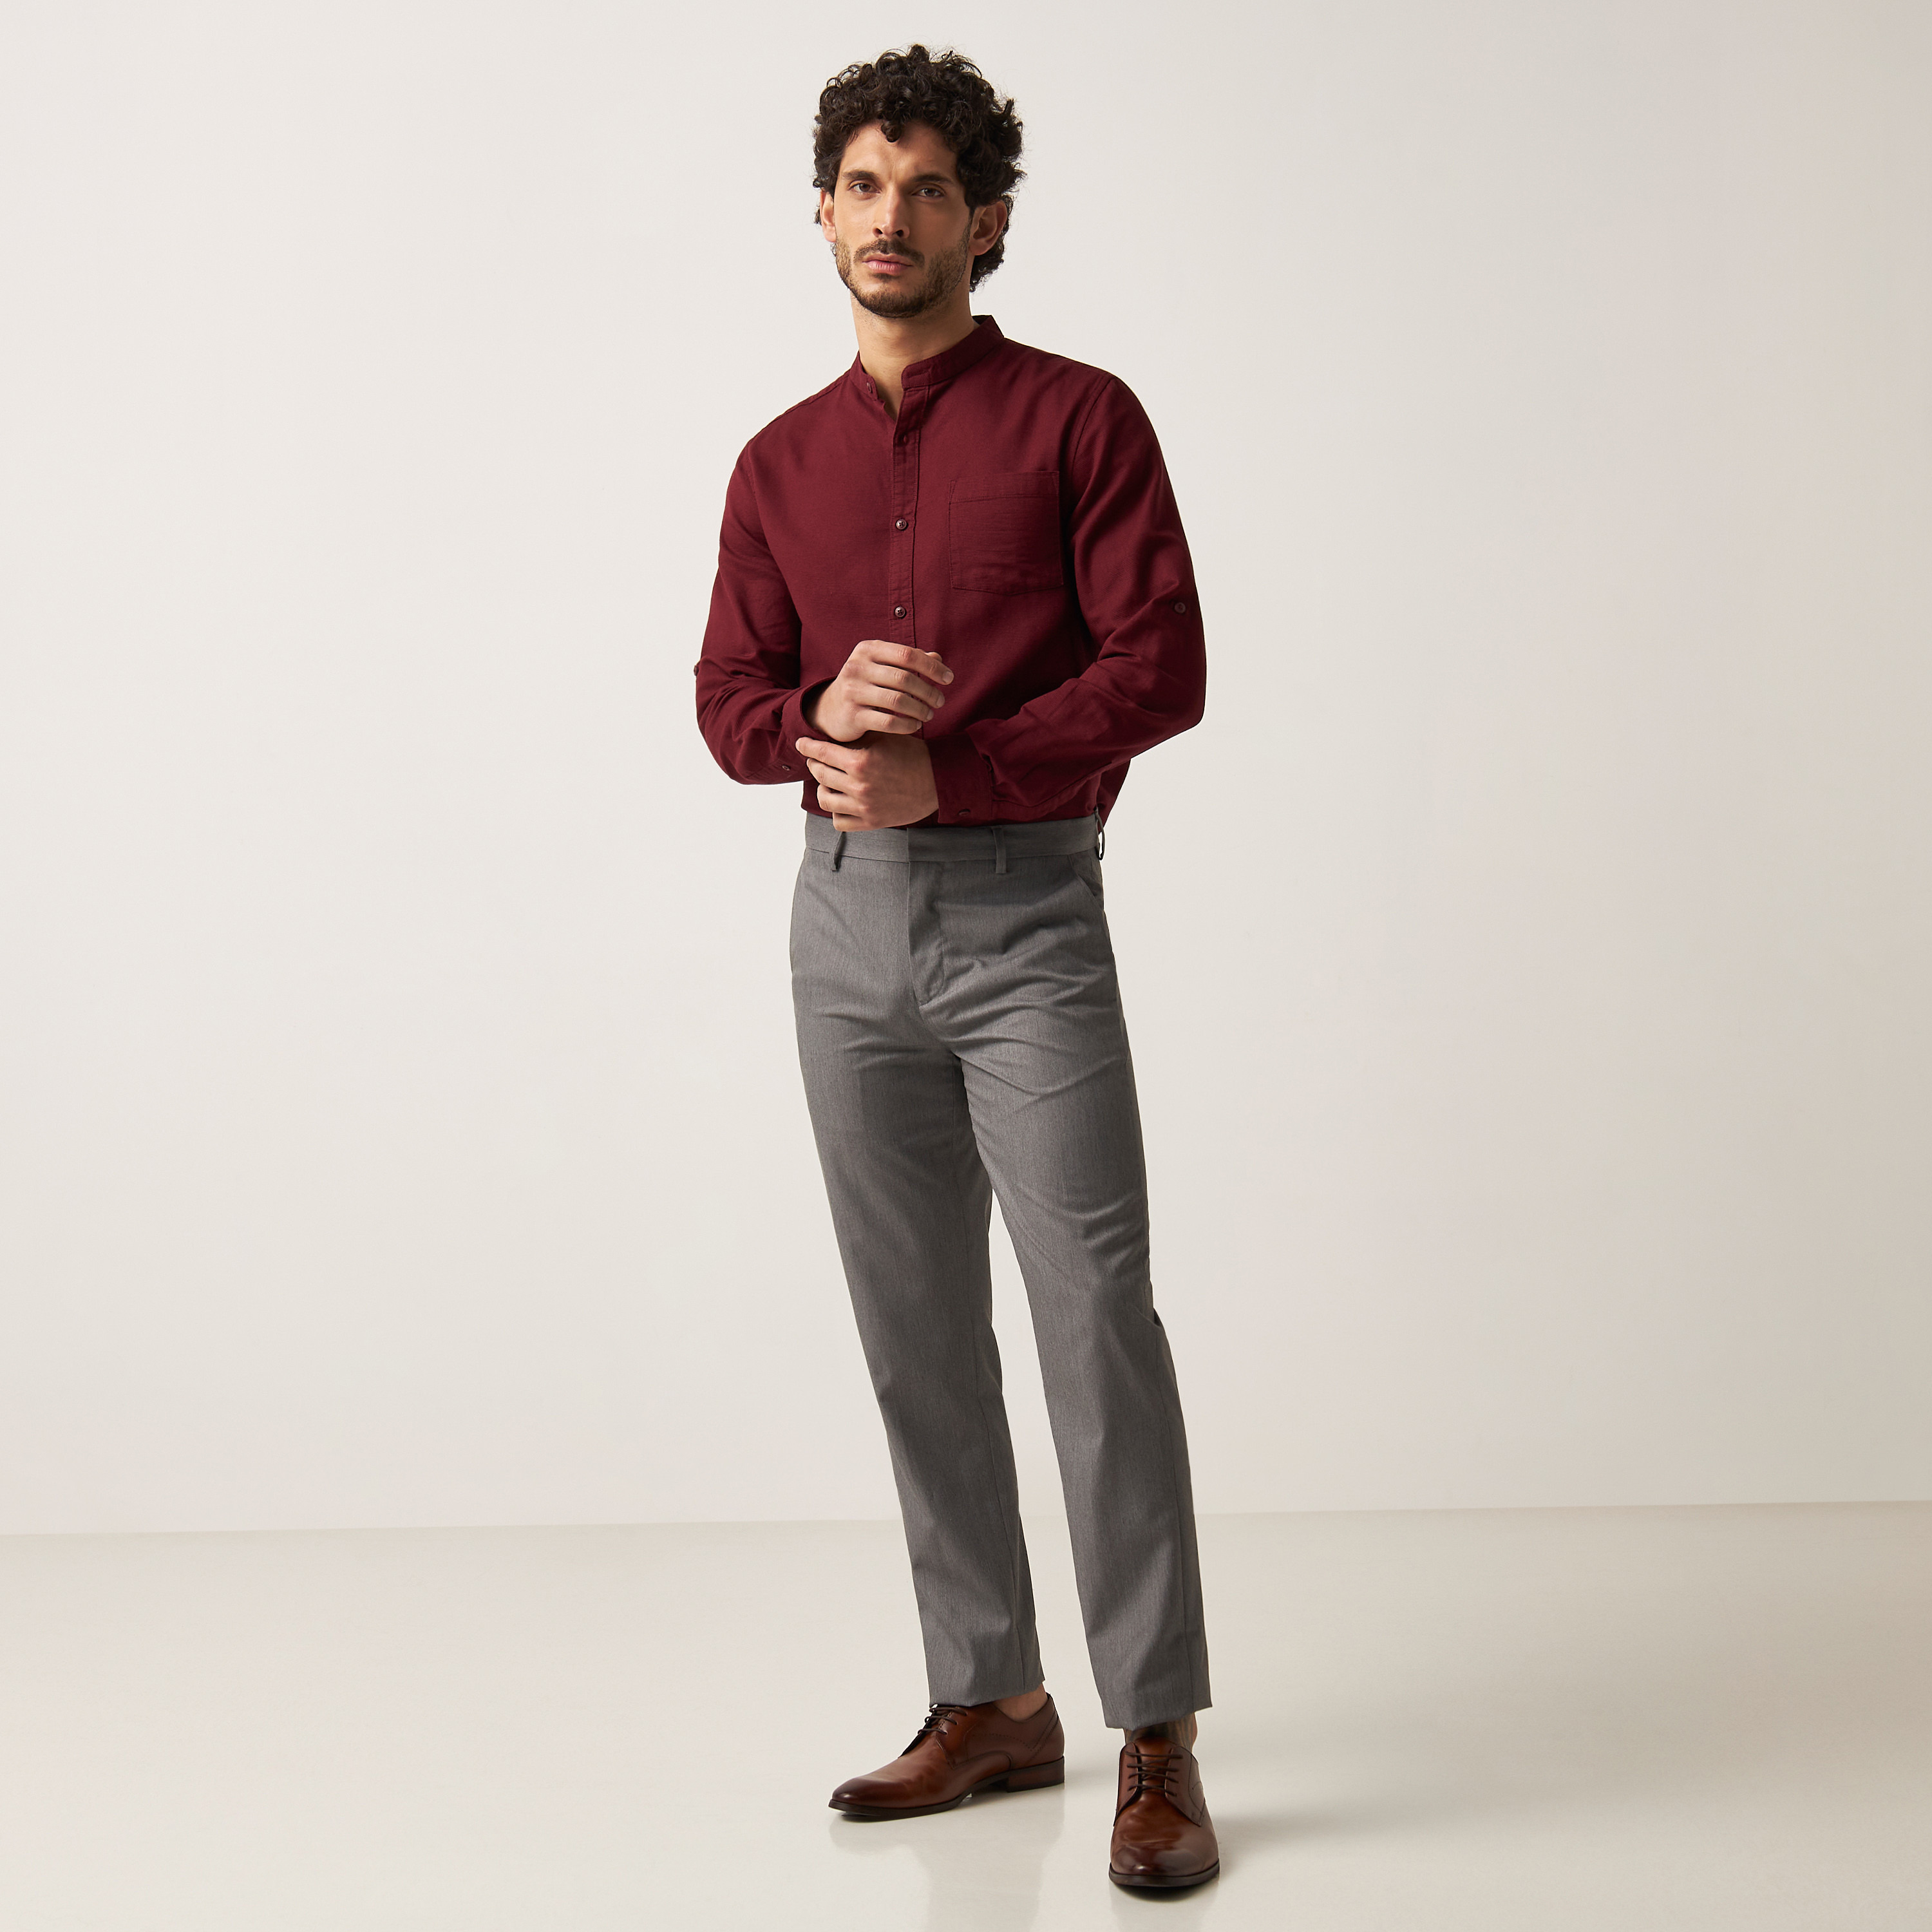 Upgrade your style: Pair formal pants with casual T-shirts